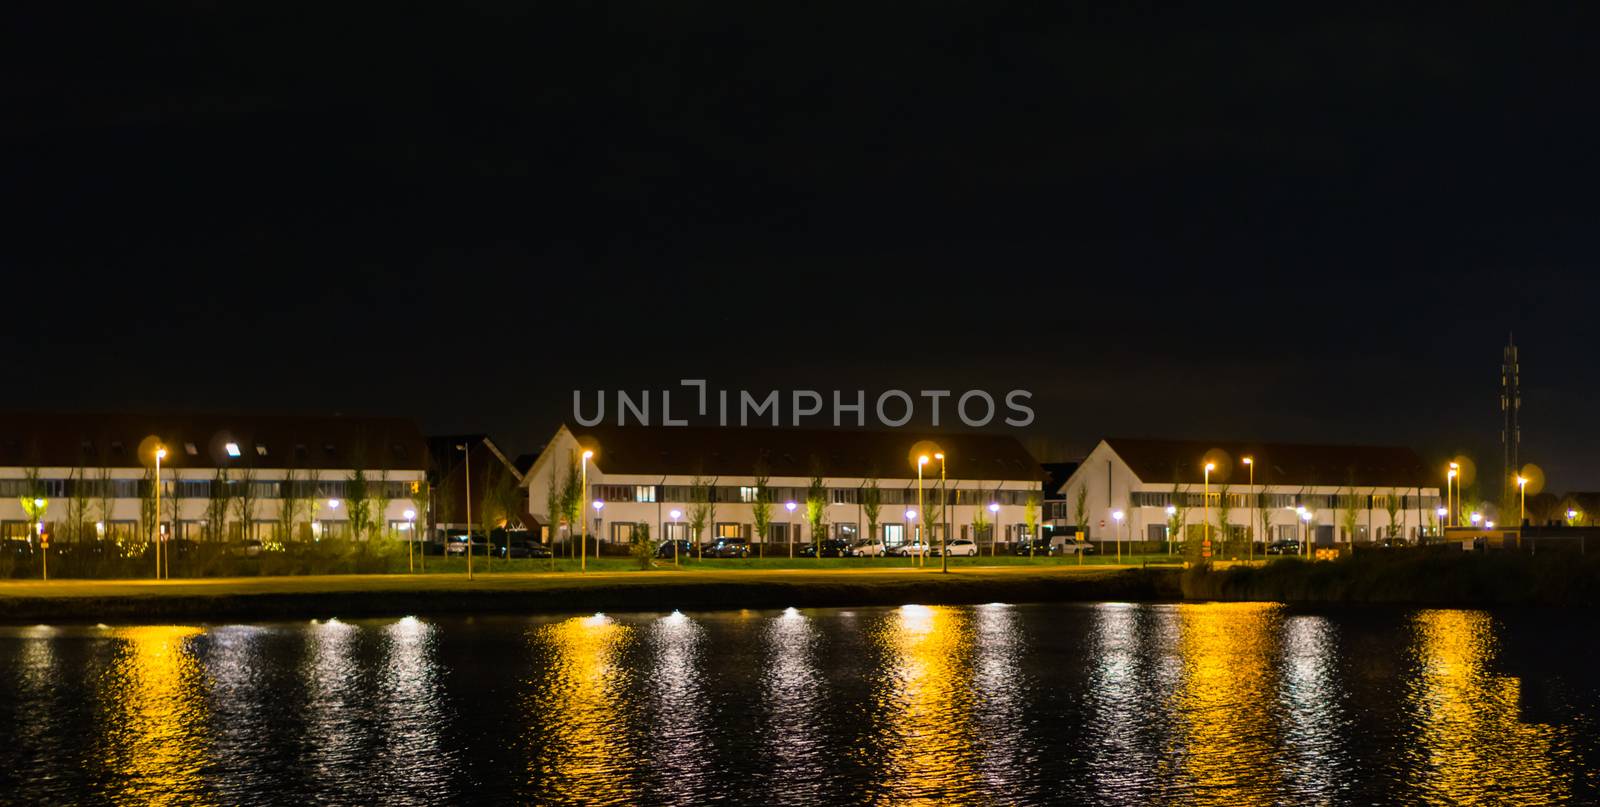 view from the water on houses and driving road at night time, dutch street view of landschapsbaan, the Meern, Utrecht the Netherlands by charlottebleijenberg